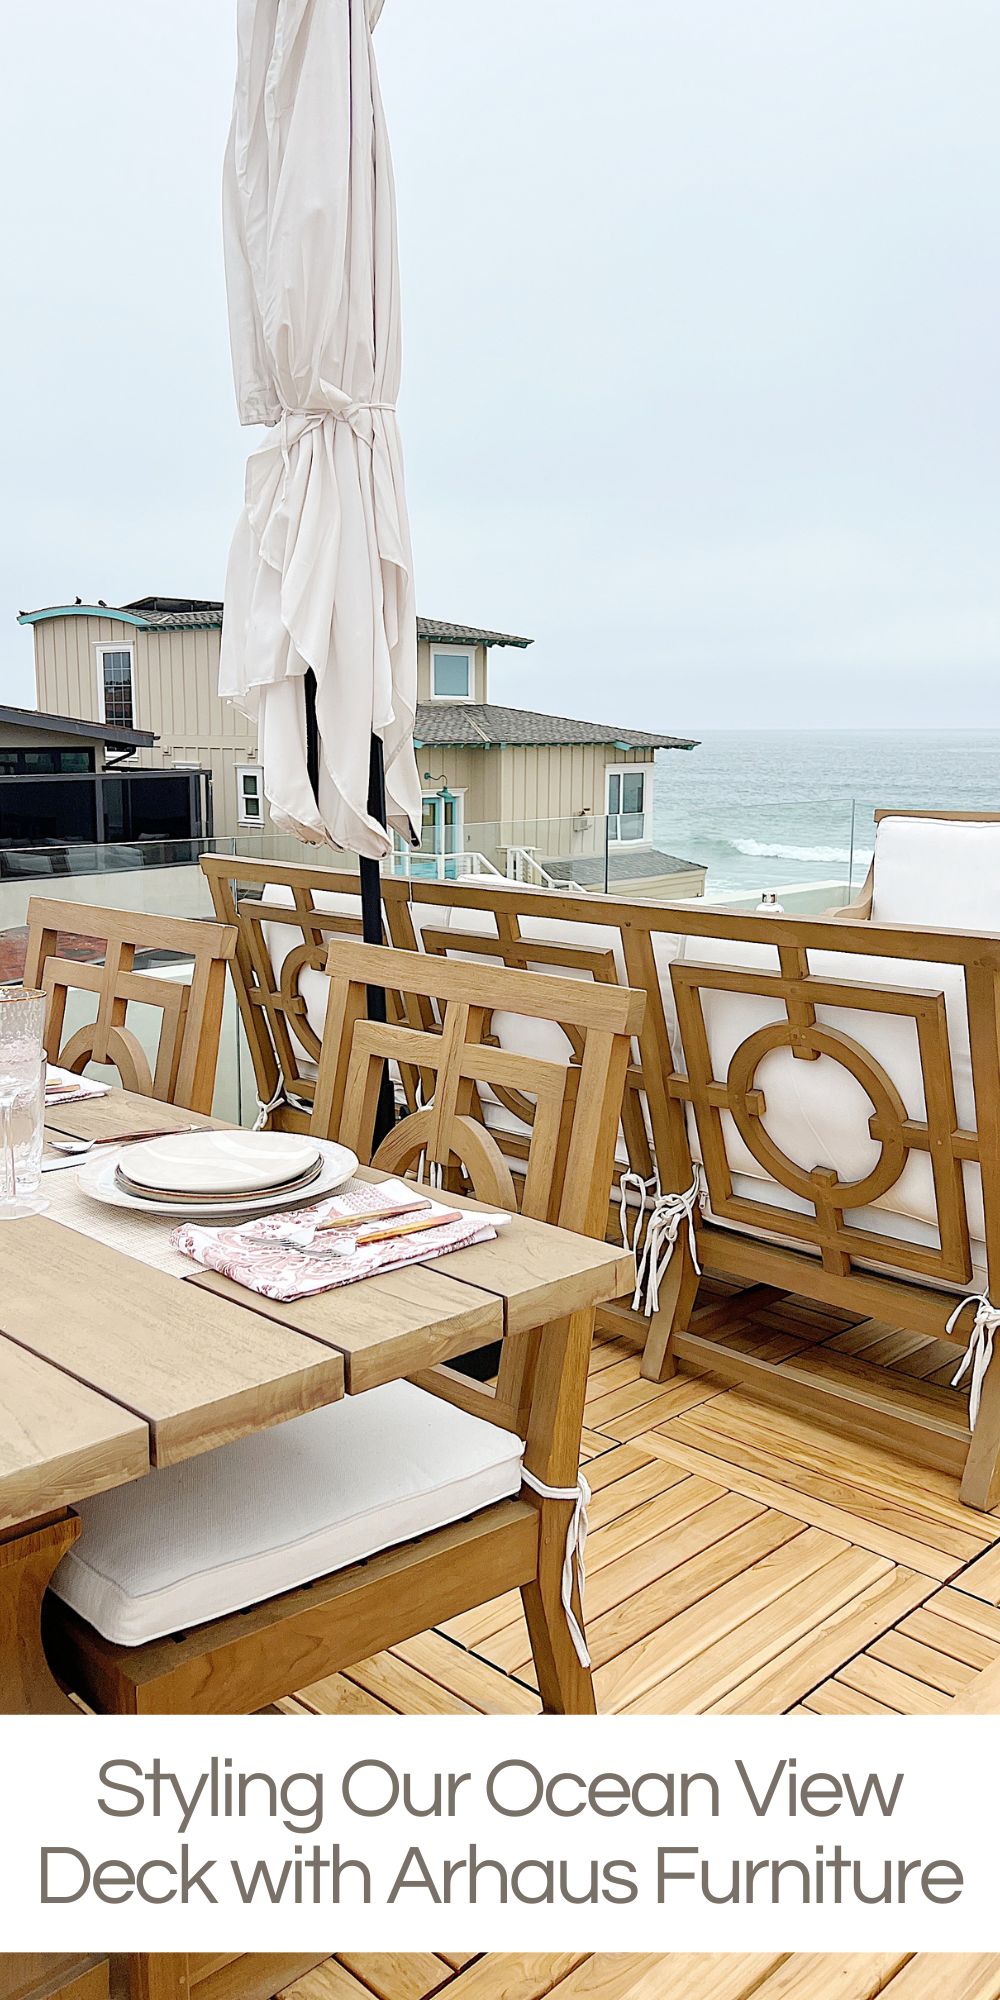 The last completed room in our beach house is the 3rd-floor deck. Using Arhaus furniture to design the deck was an incredible experience.